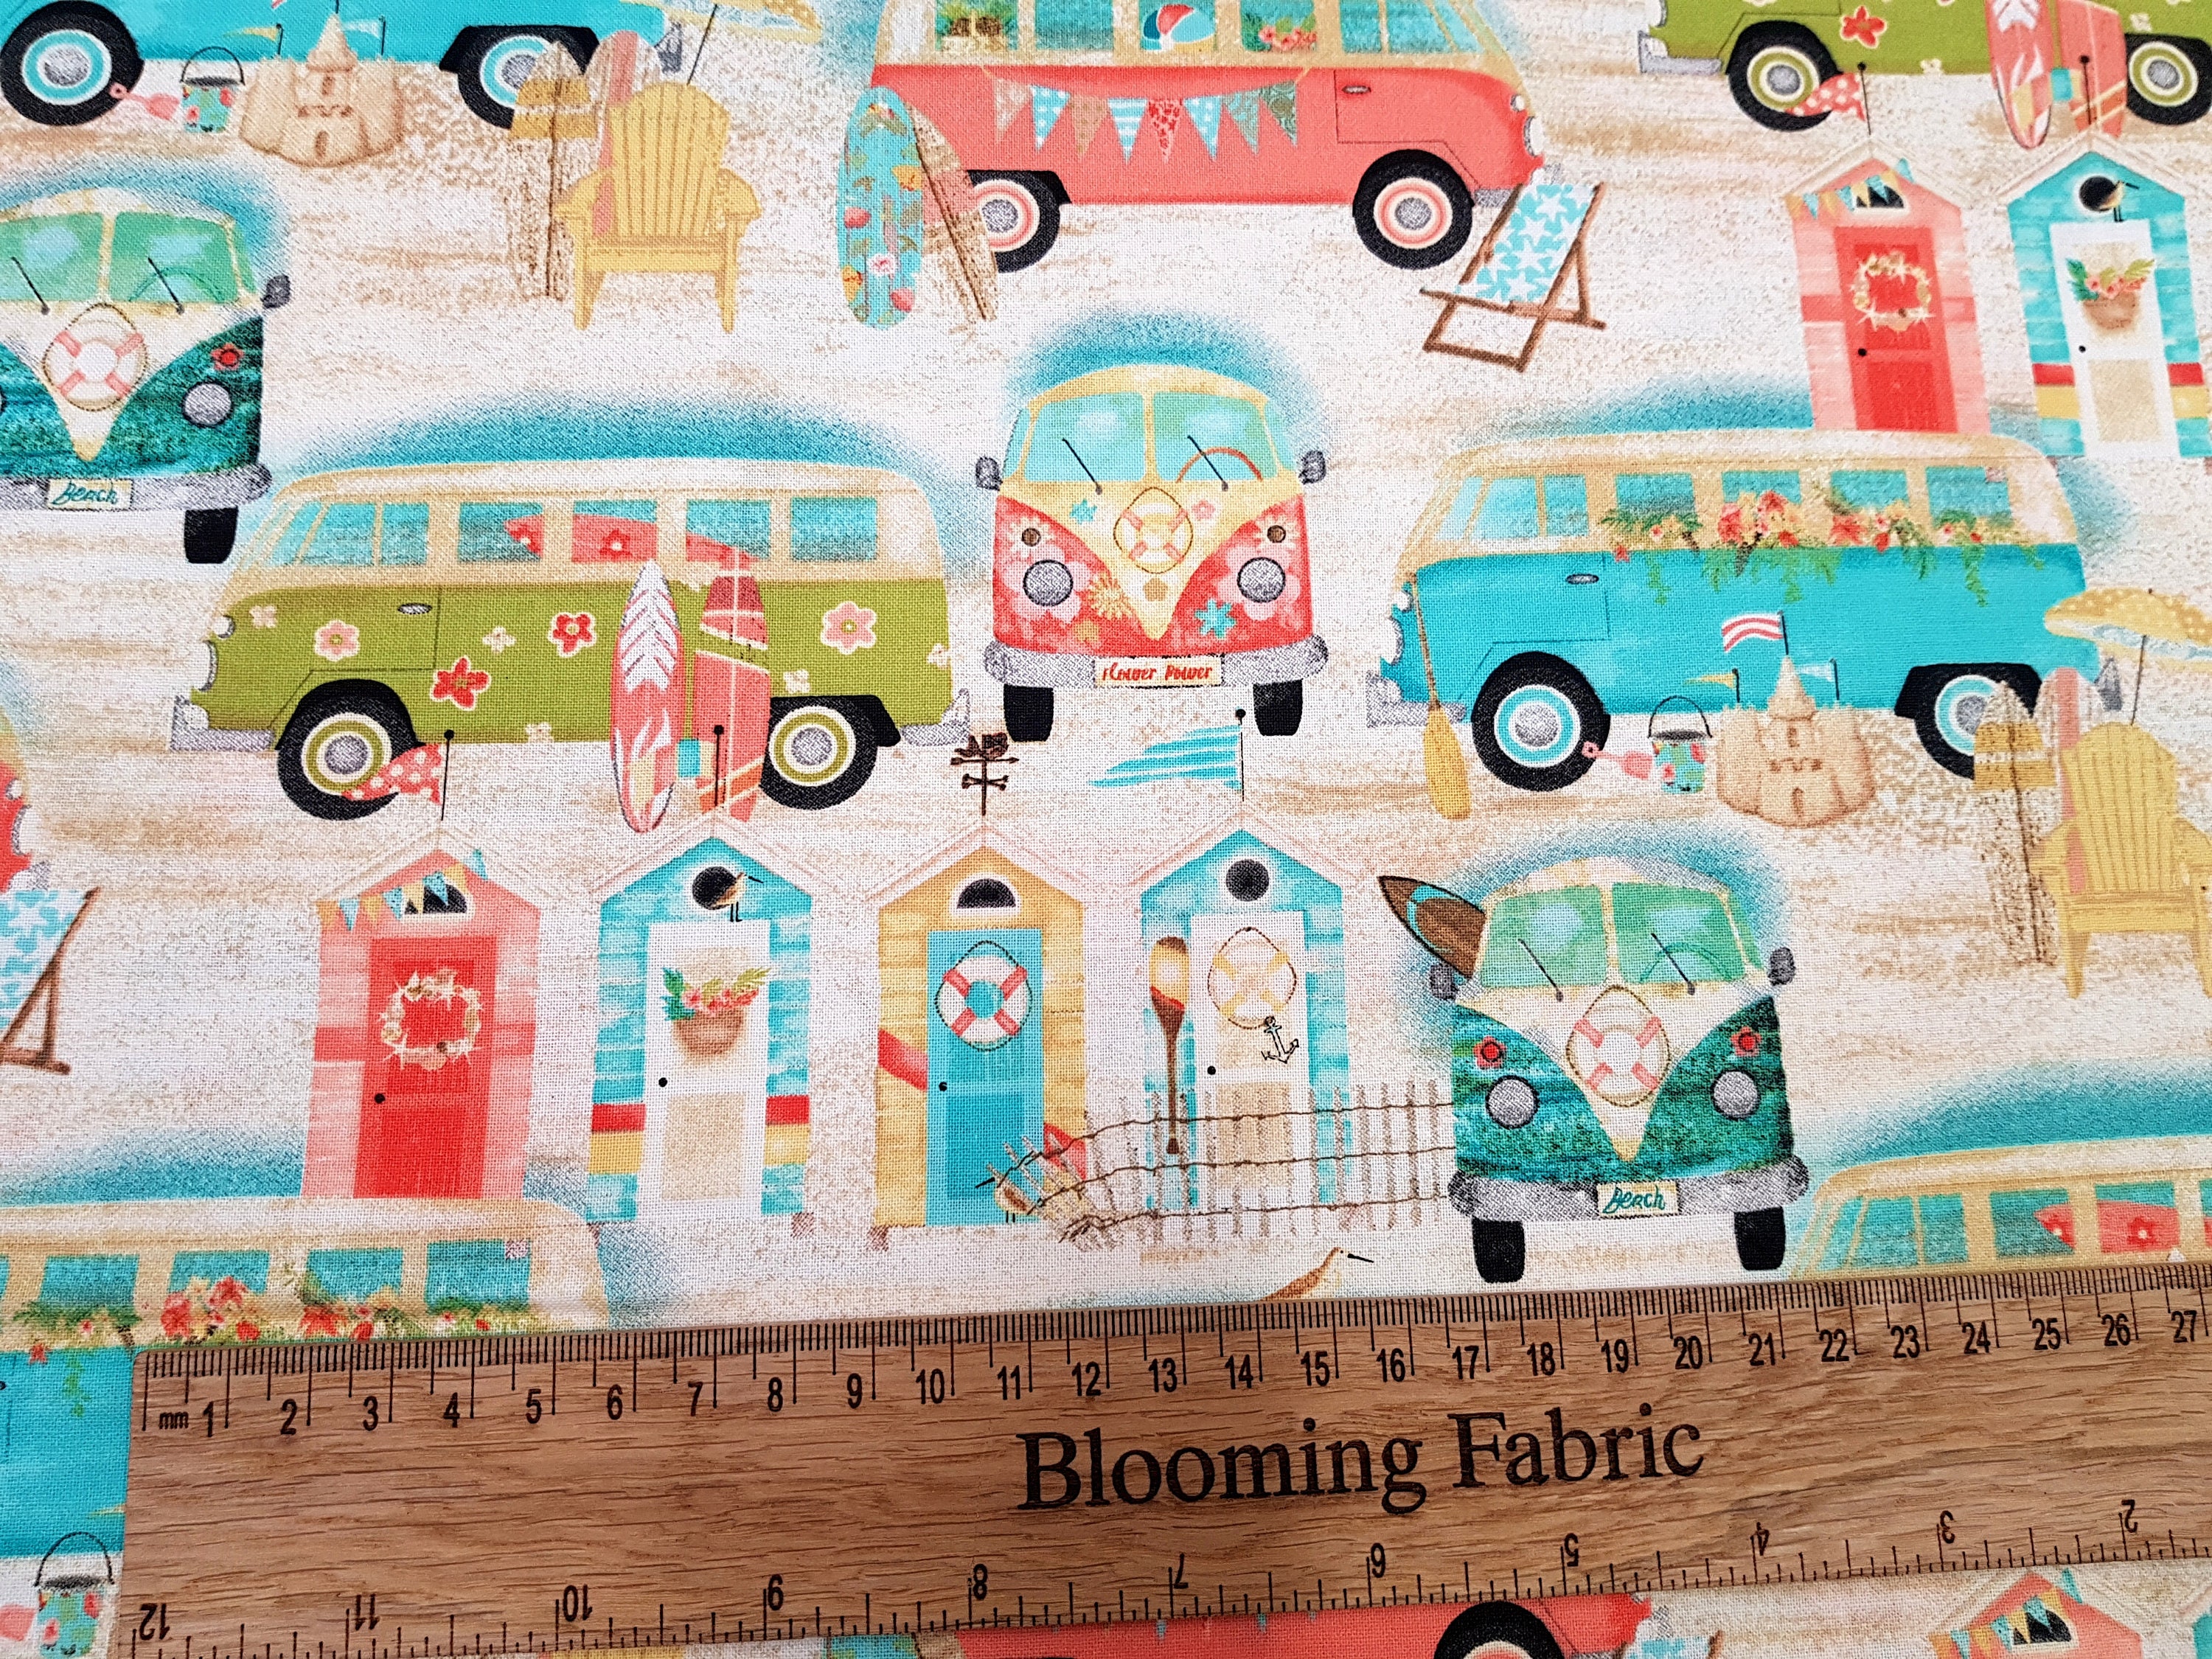 adventure cotton 100/% cotton YardMeter wide 44 Pink outdoors fabric Camping fabric camper van fabric